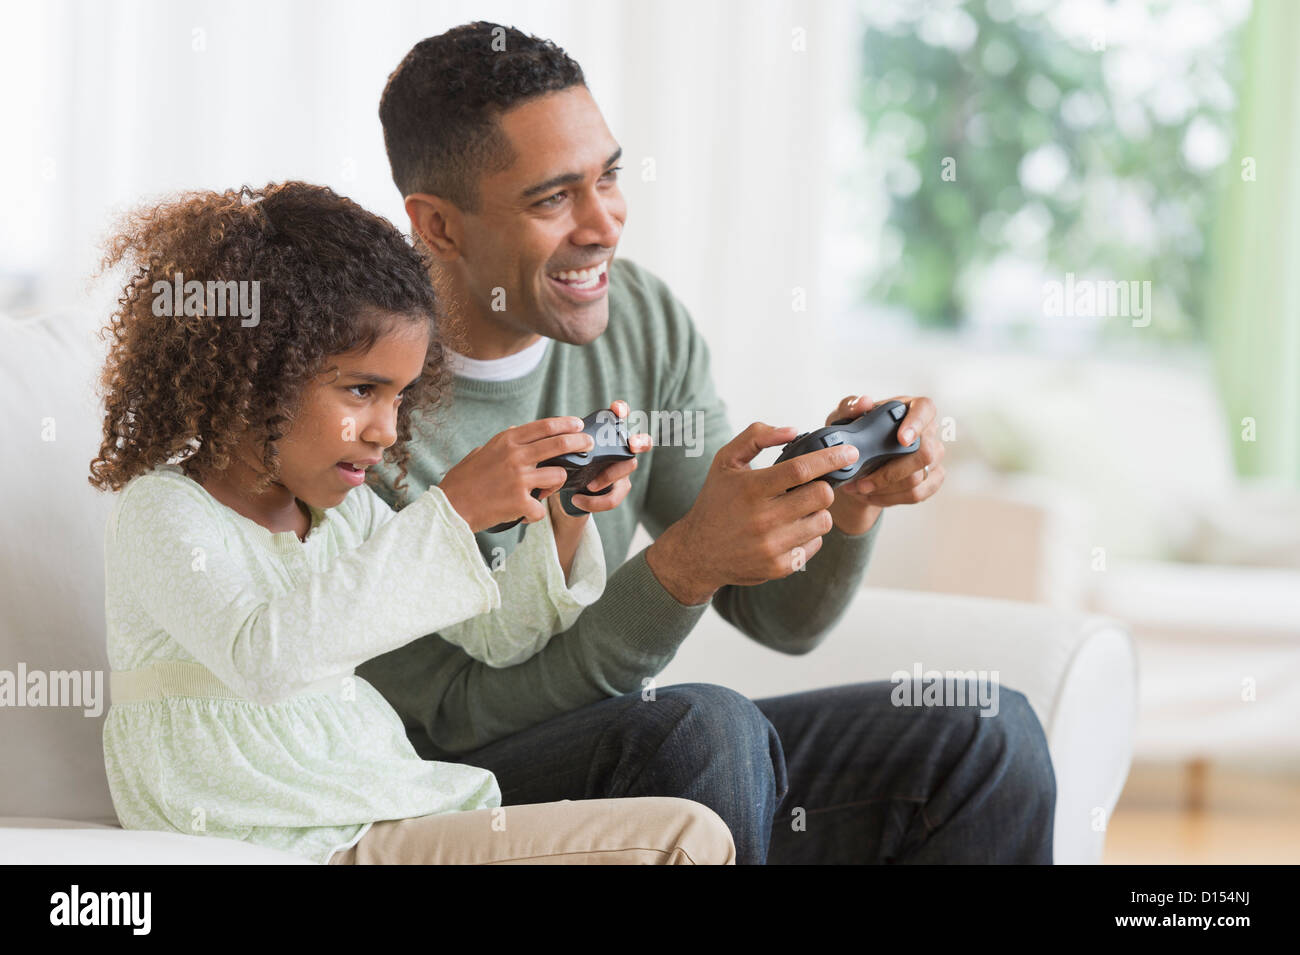 USA, New Jersey, Jersey City, Father and daughter (6-7) playing video game Stock Photo